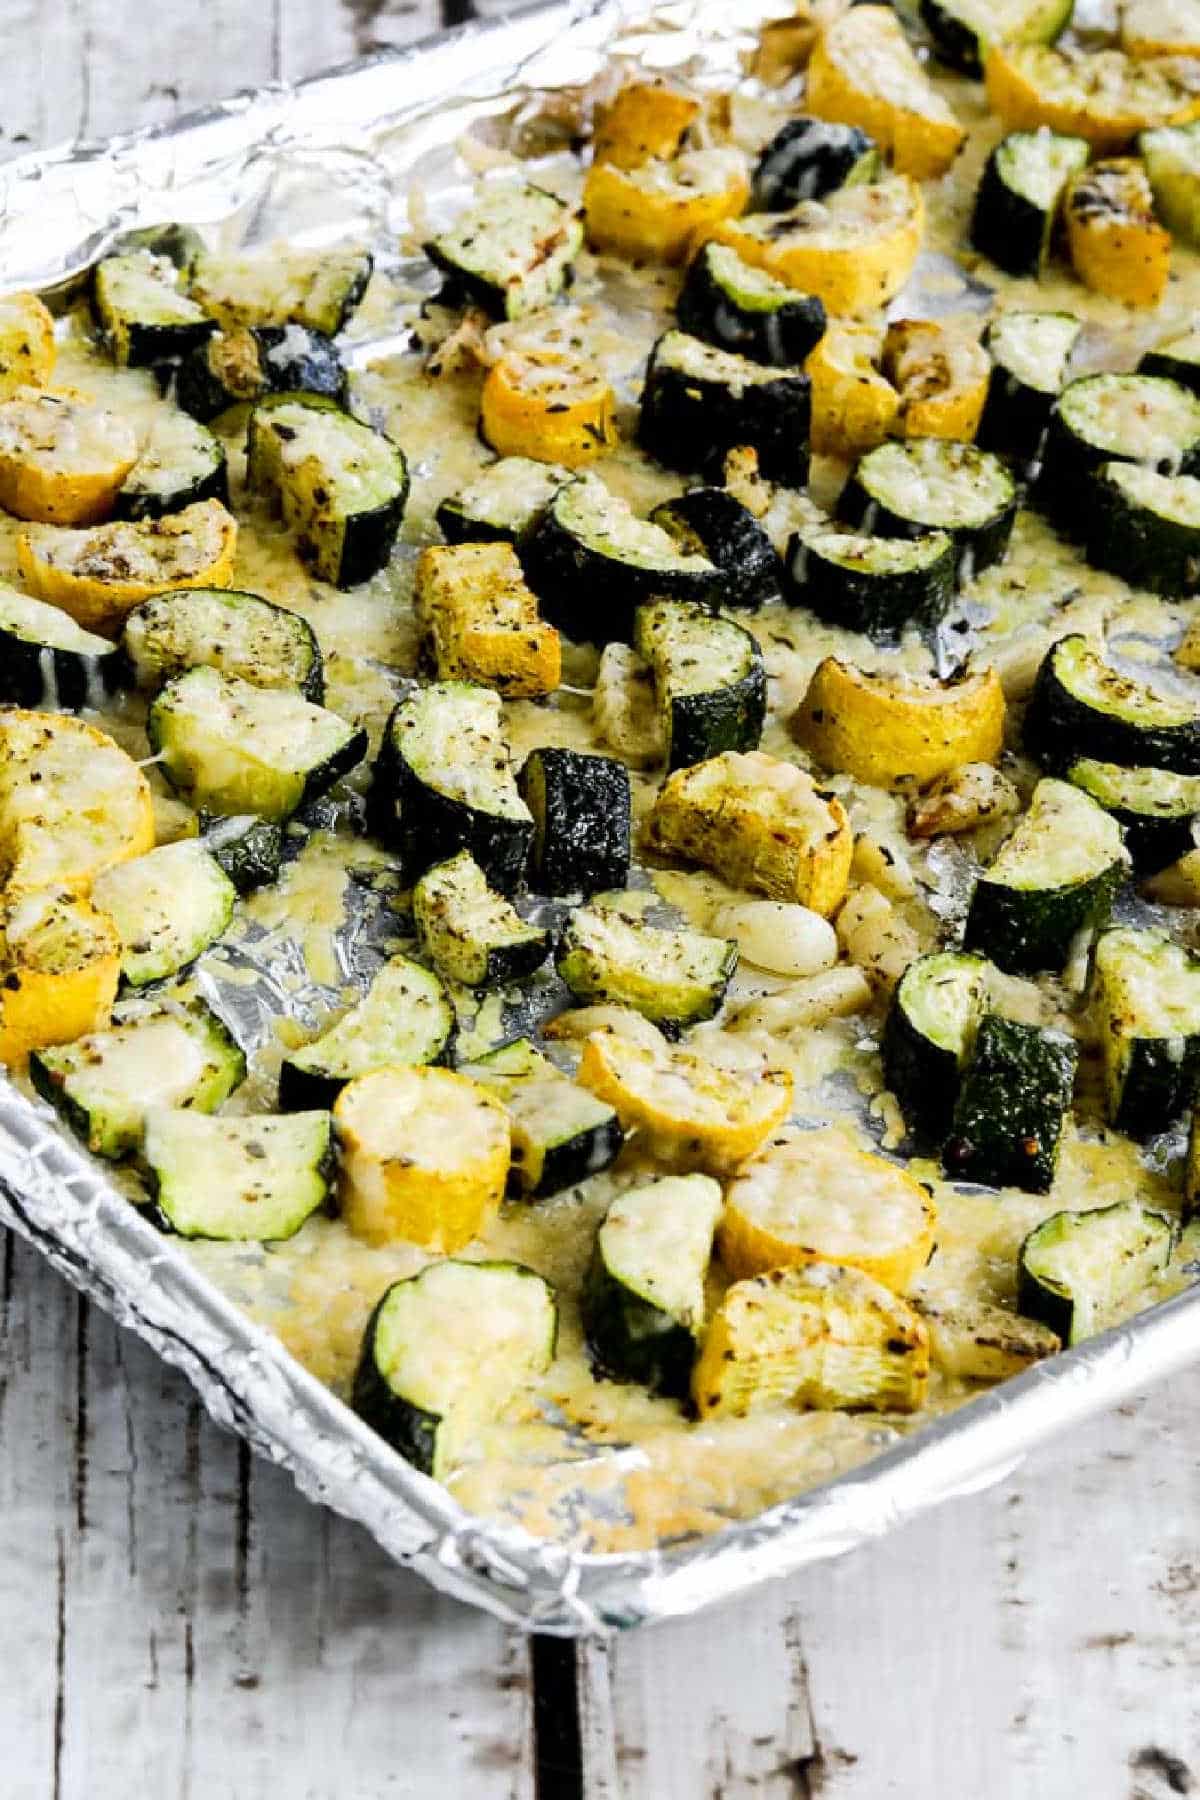 Roasted summer squash with garlic and parmesan cheese on a baking sheet at a wooden table